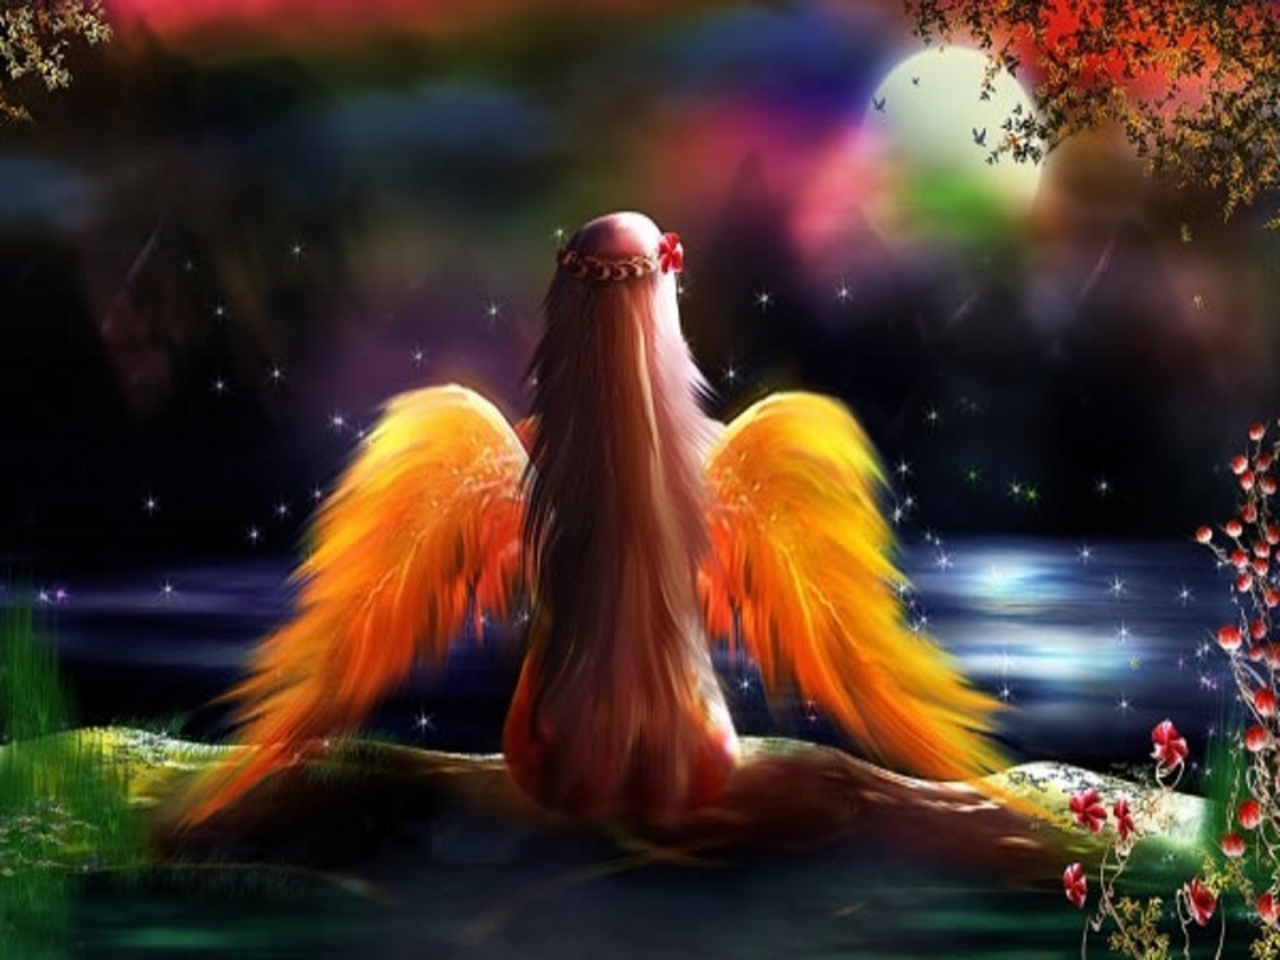 Colorful Fairy Computer Wallpapers Desktop Backgrounds 1280x960 1280x960